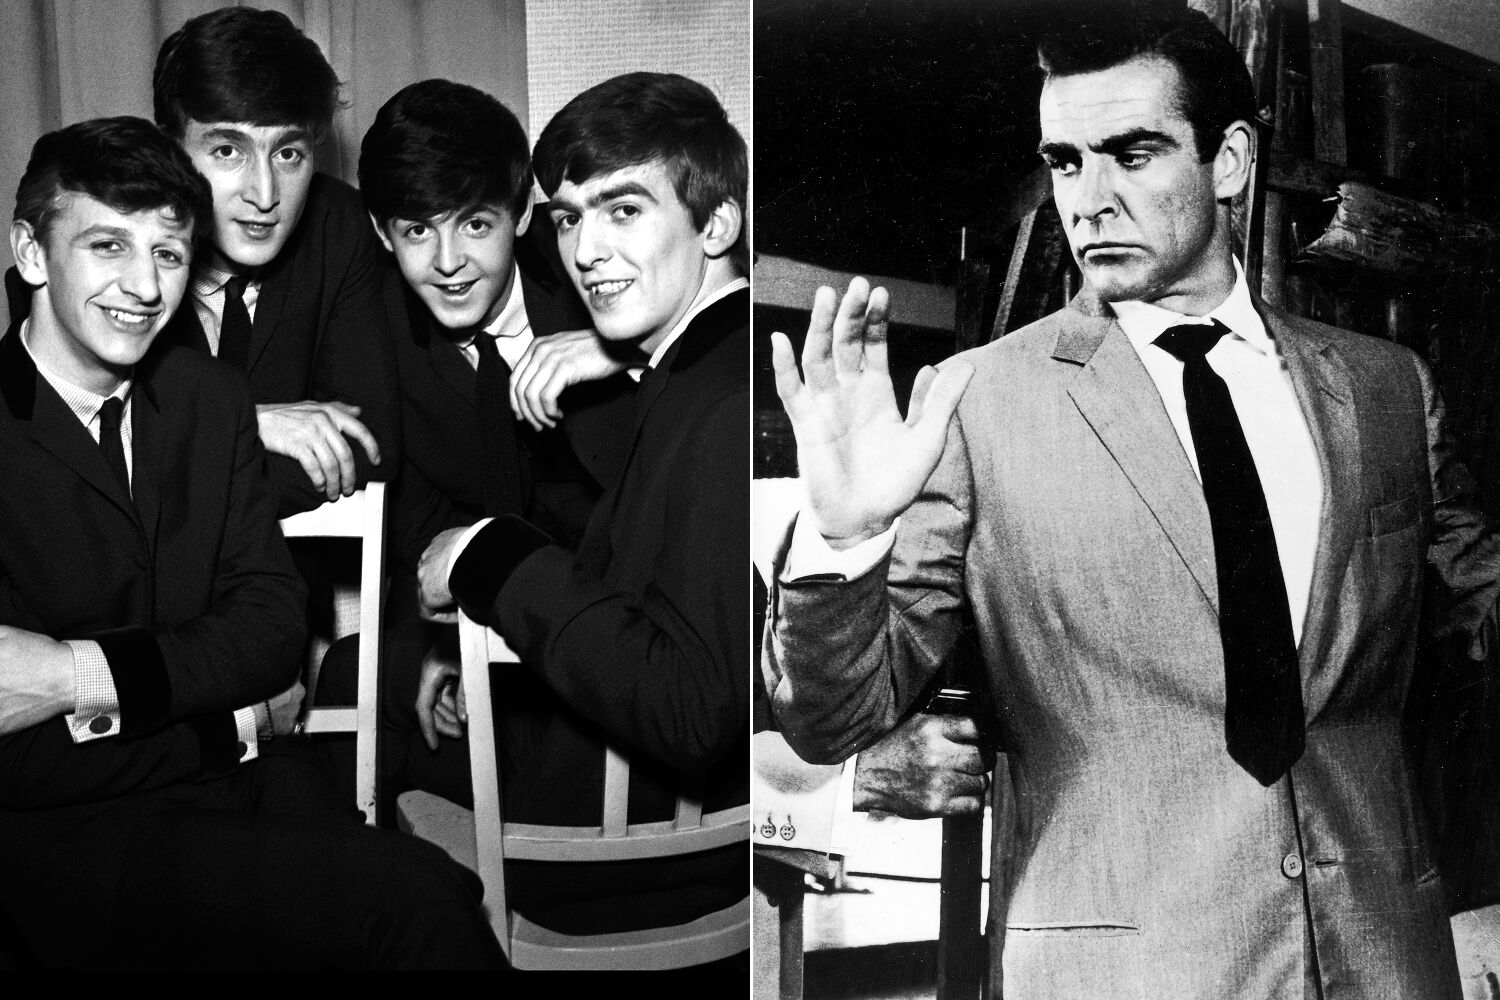 Forget the Stones: Beatles vs. Bond was the real British rivalry, per a new book